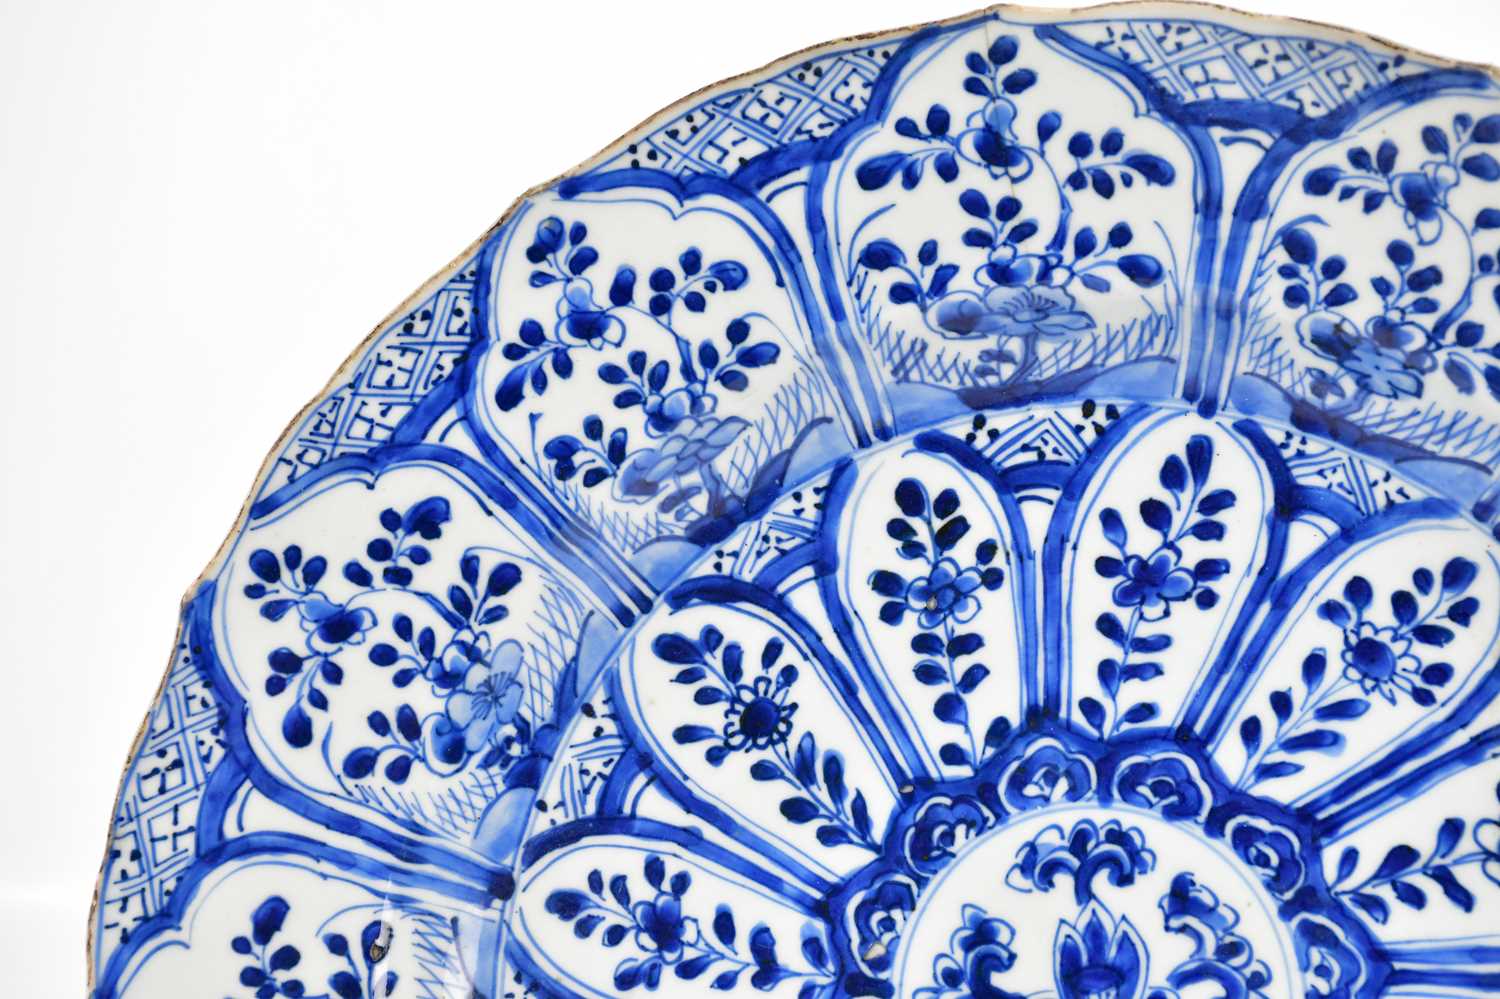 An 18th century Chinese blue and white Kraak ware charger decorated in panels with floral - Image 2 of 9